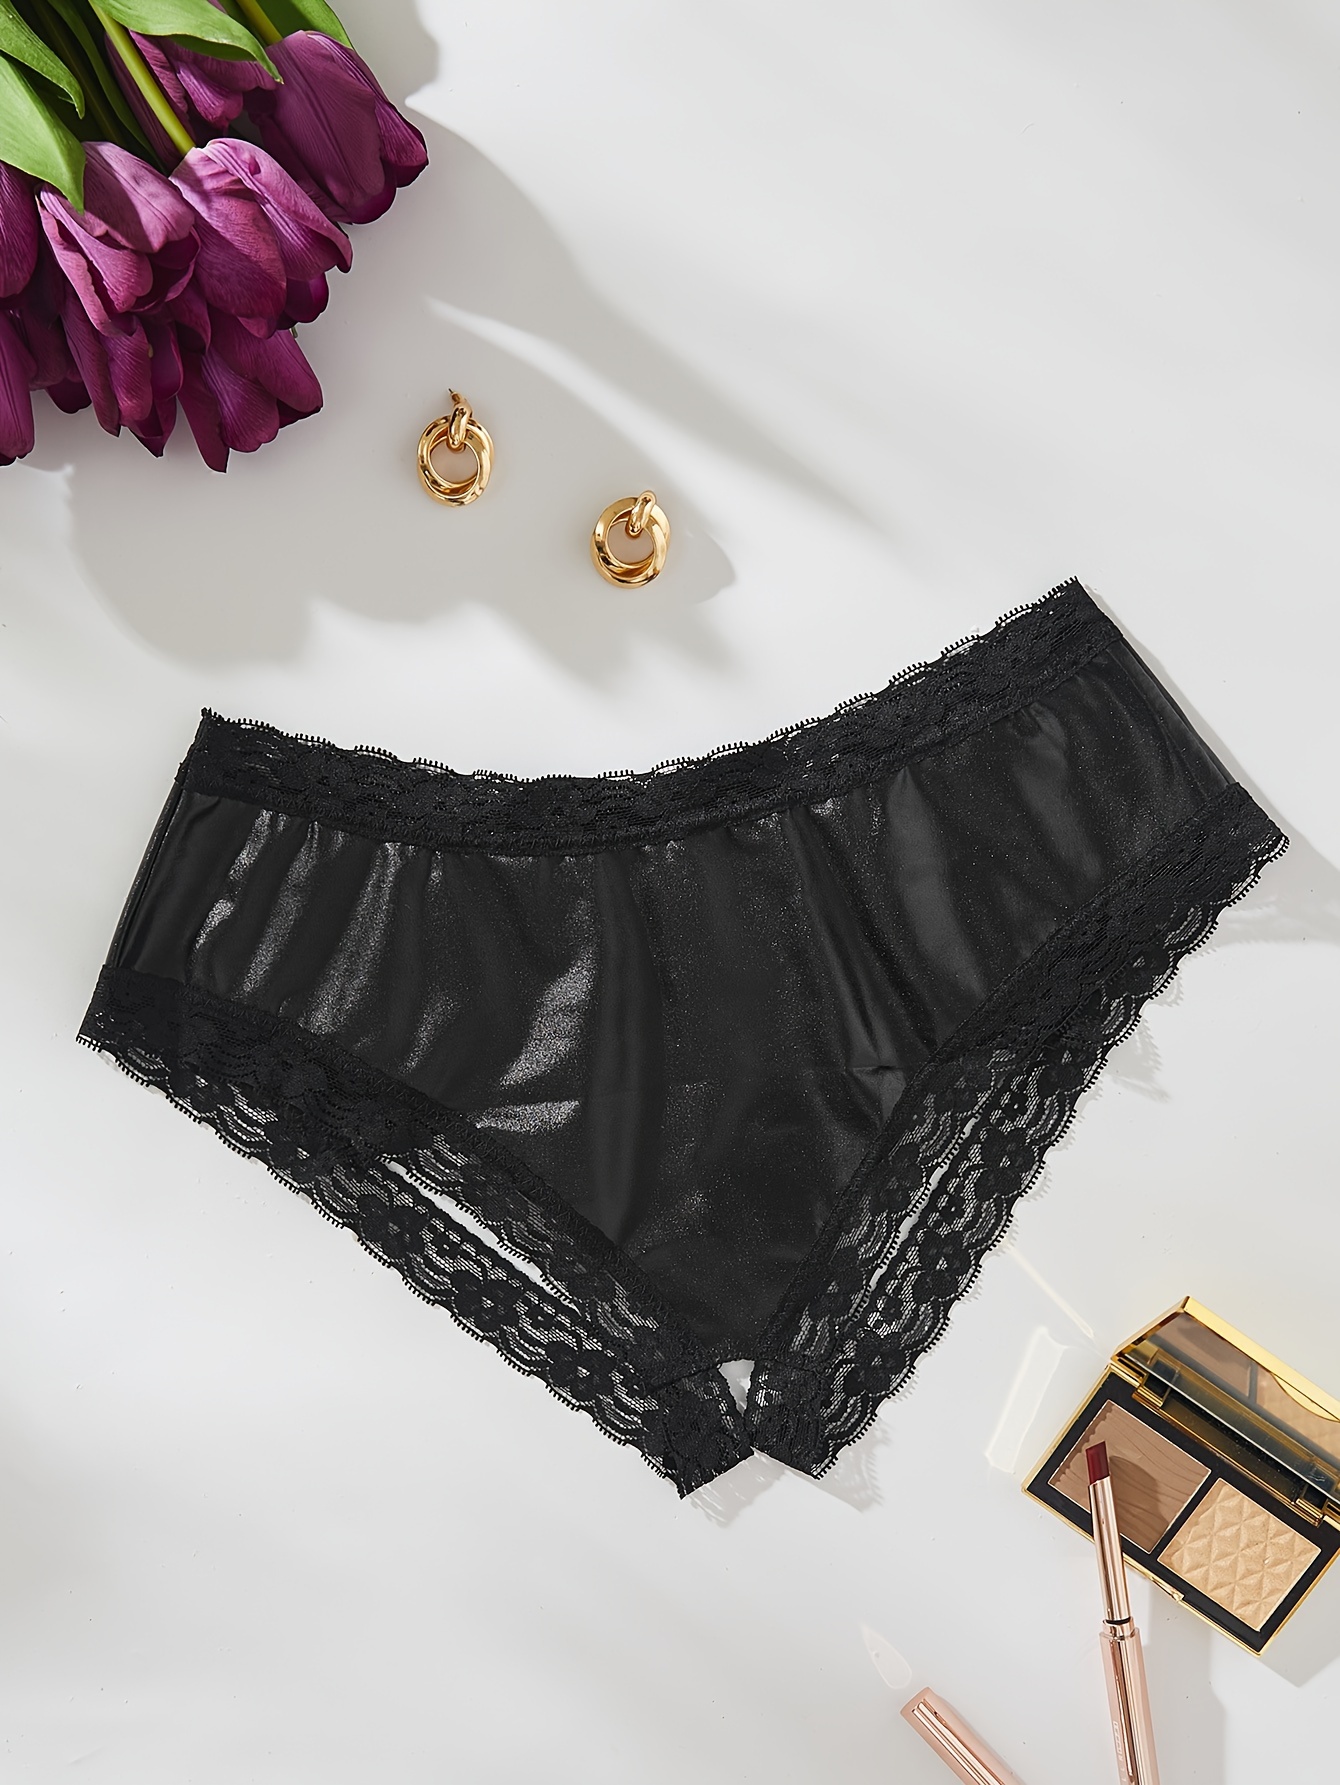 WOMENS SEXY BLACK OR WHITE OPEN CROTCH CROTCHLESS KNICKERS PANTIES